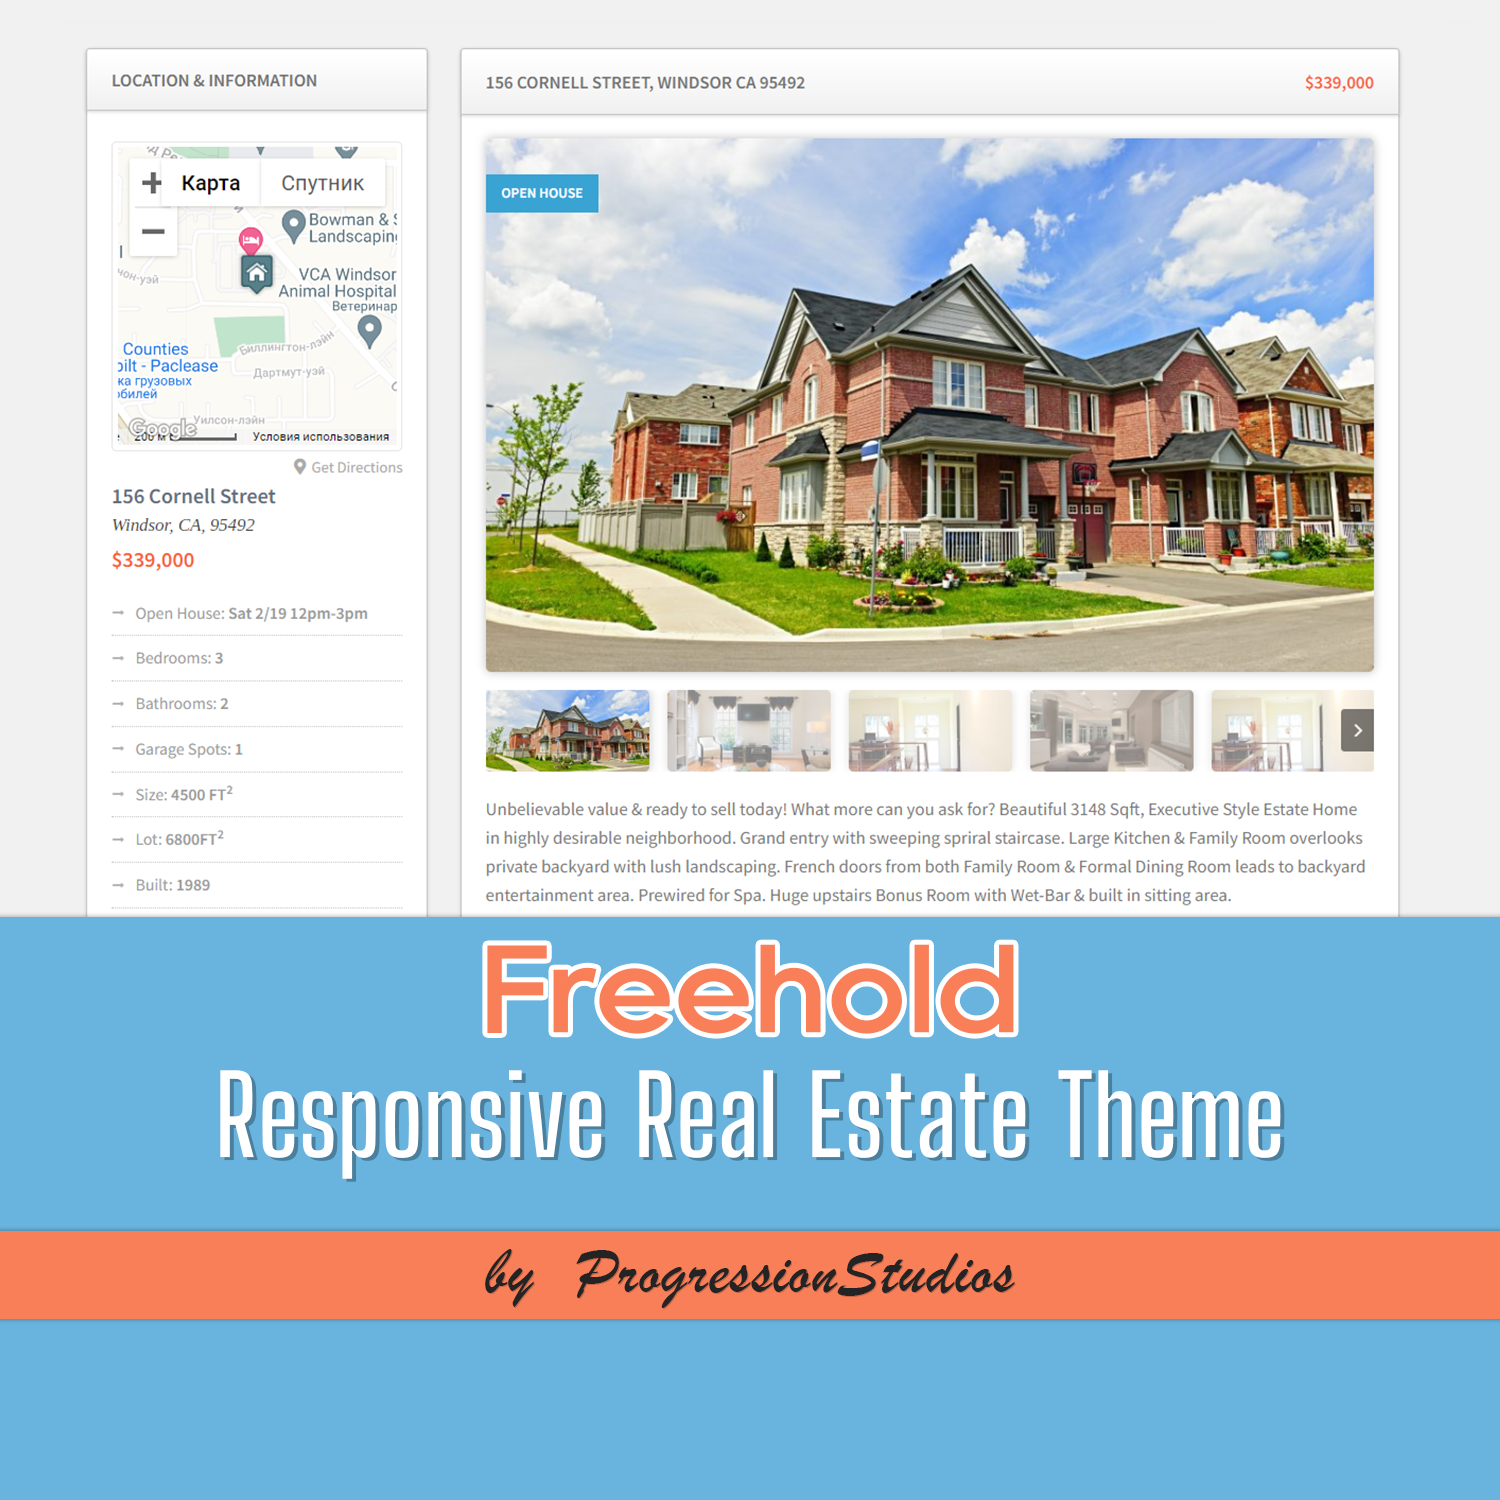 Preview freehold responsive real estate theme.